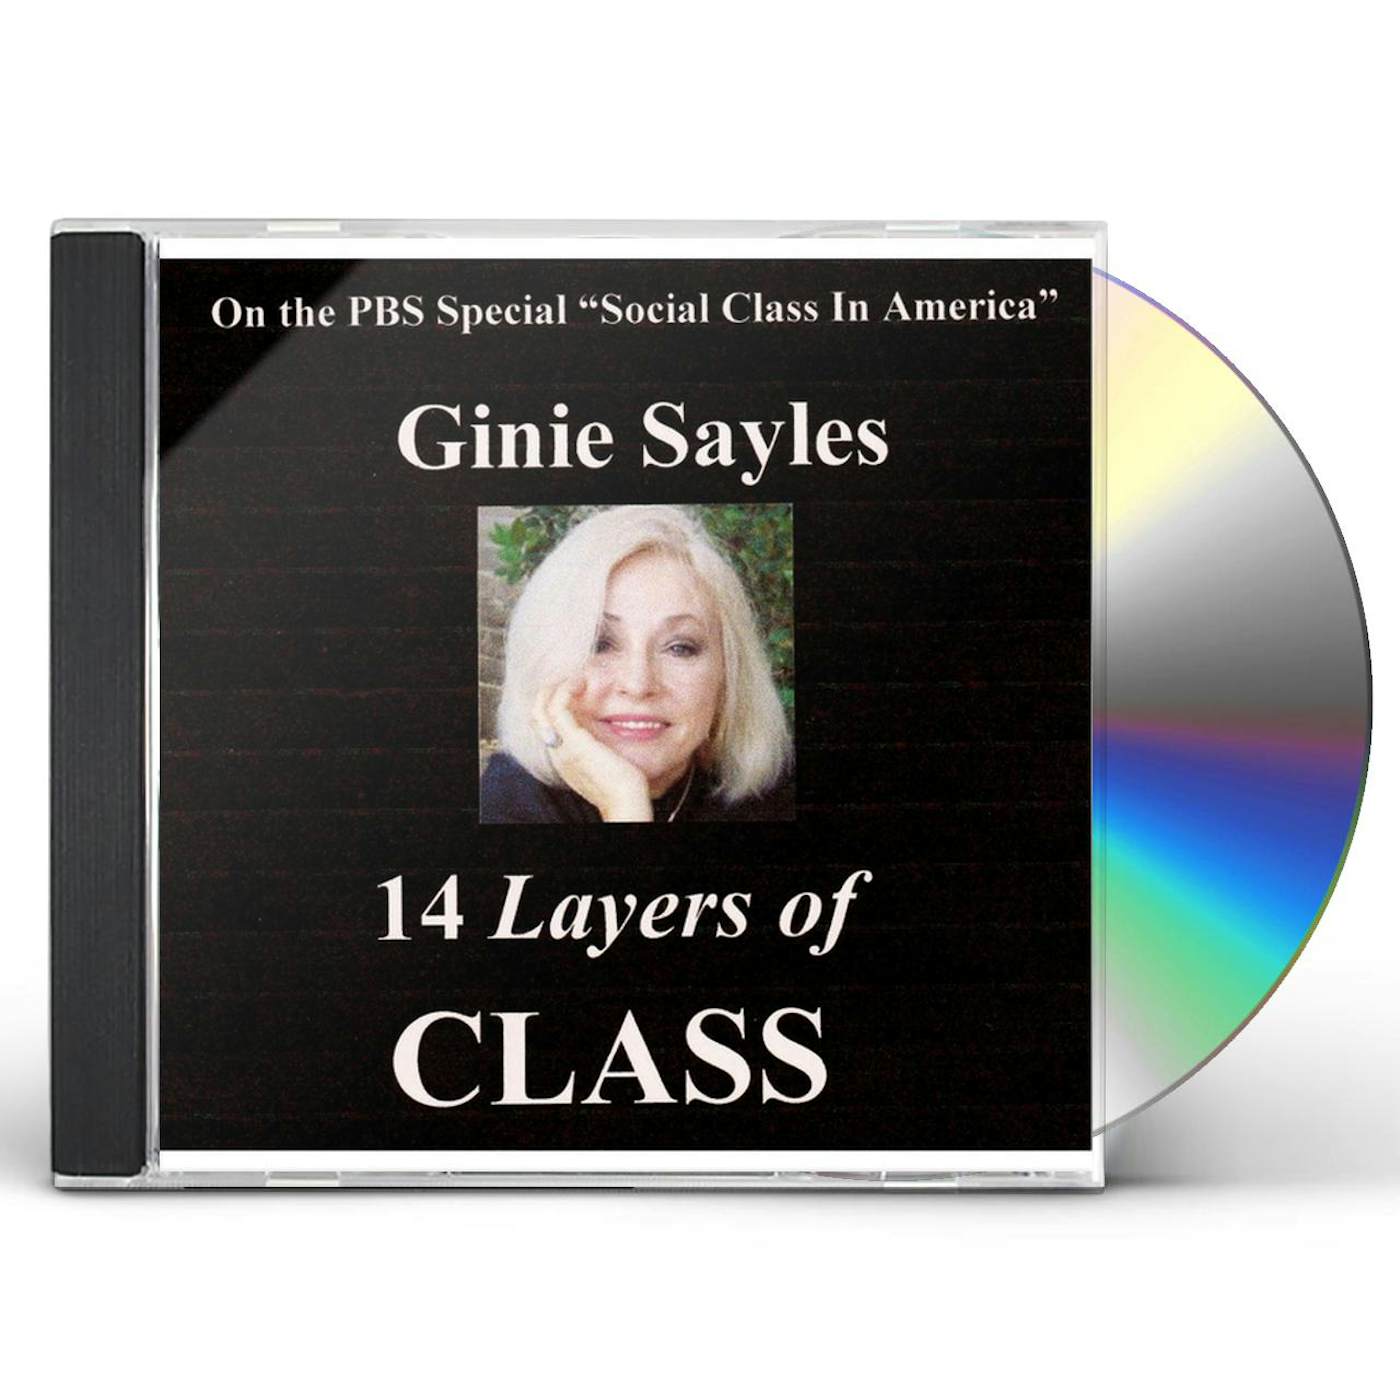 Ginie Sayles 14 LAYERS OF CLASS CD